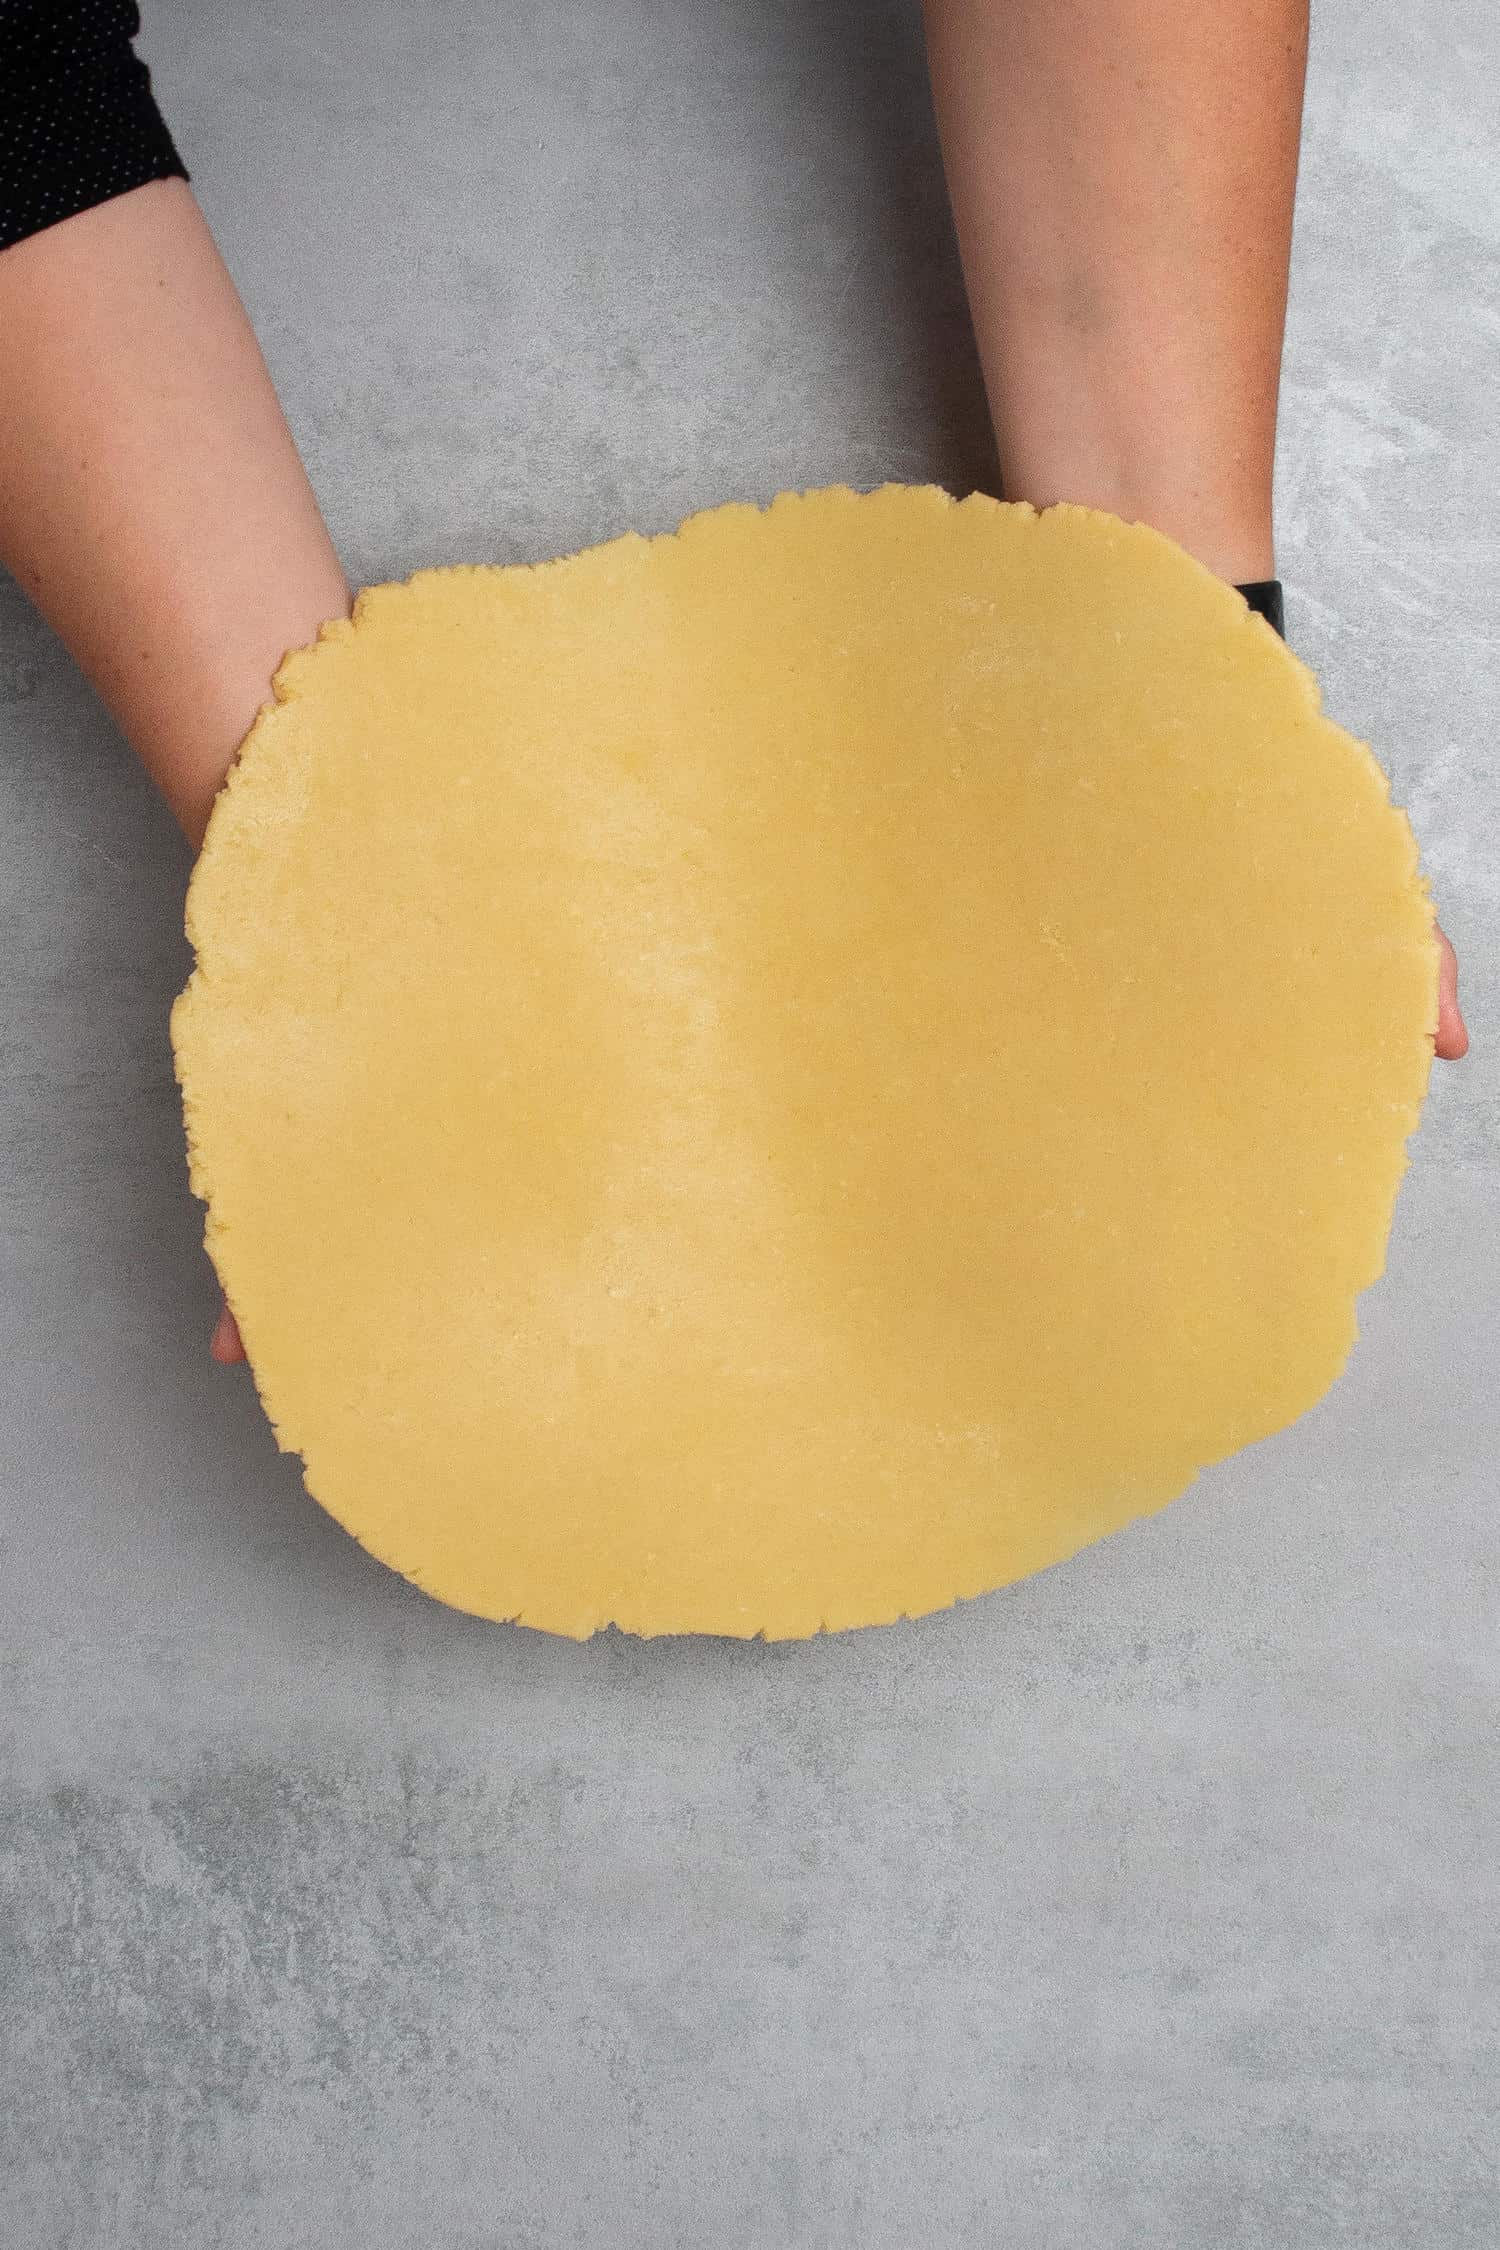 Showing the thin rolled pie dough  